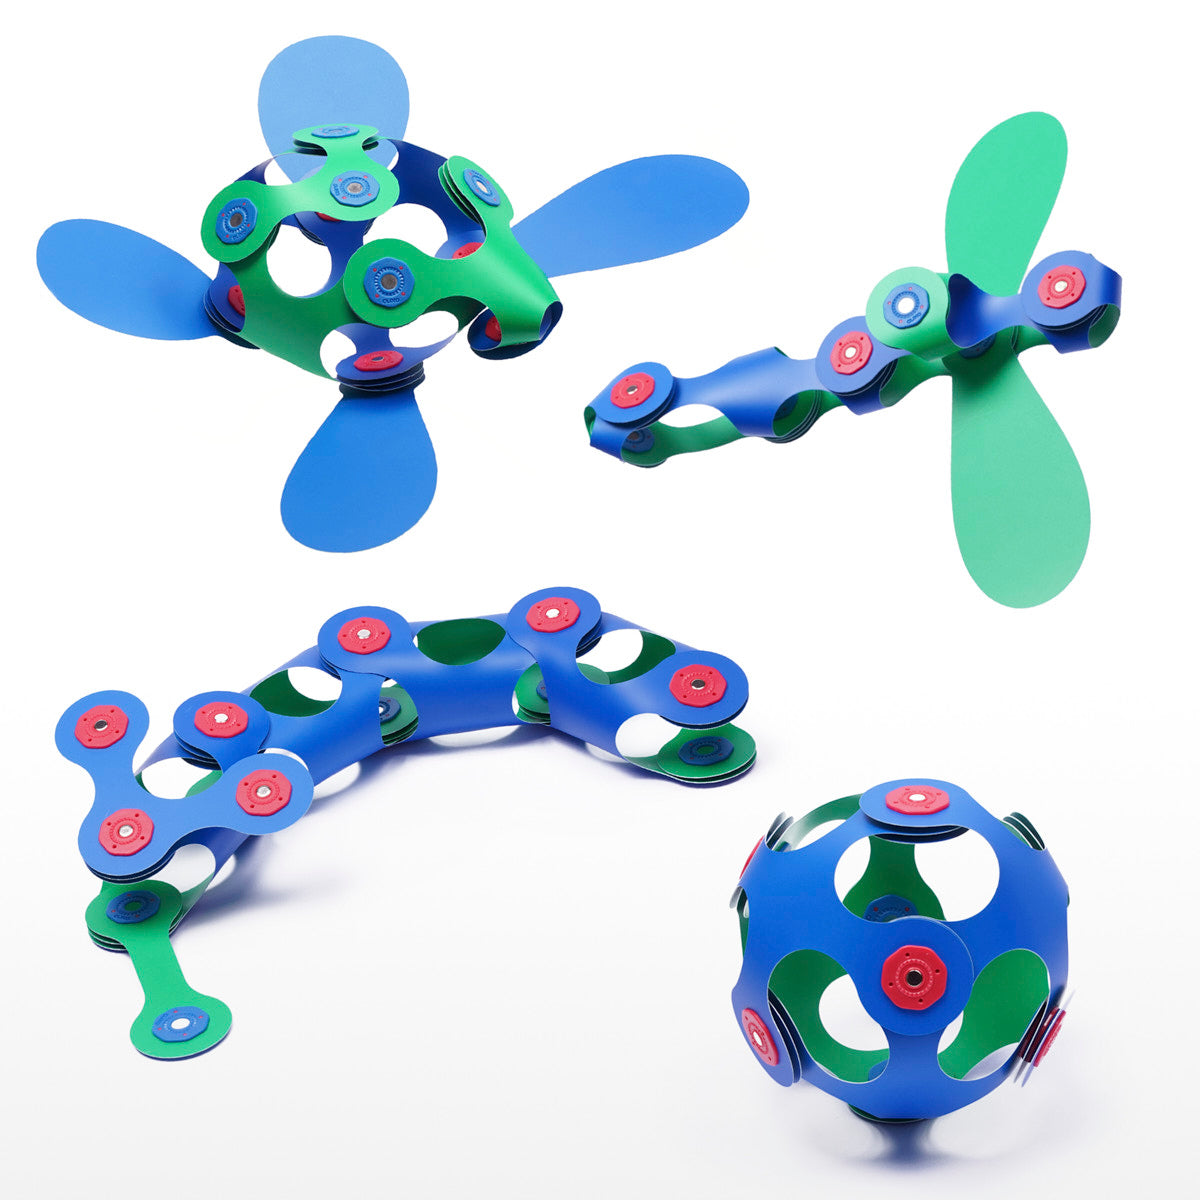 Clixo Grab & Go Magnetic Toy for Kids